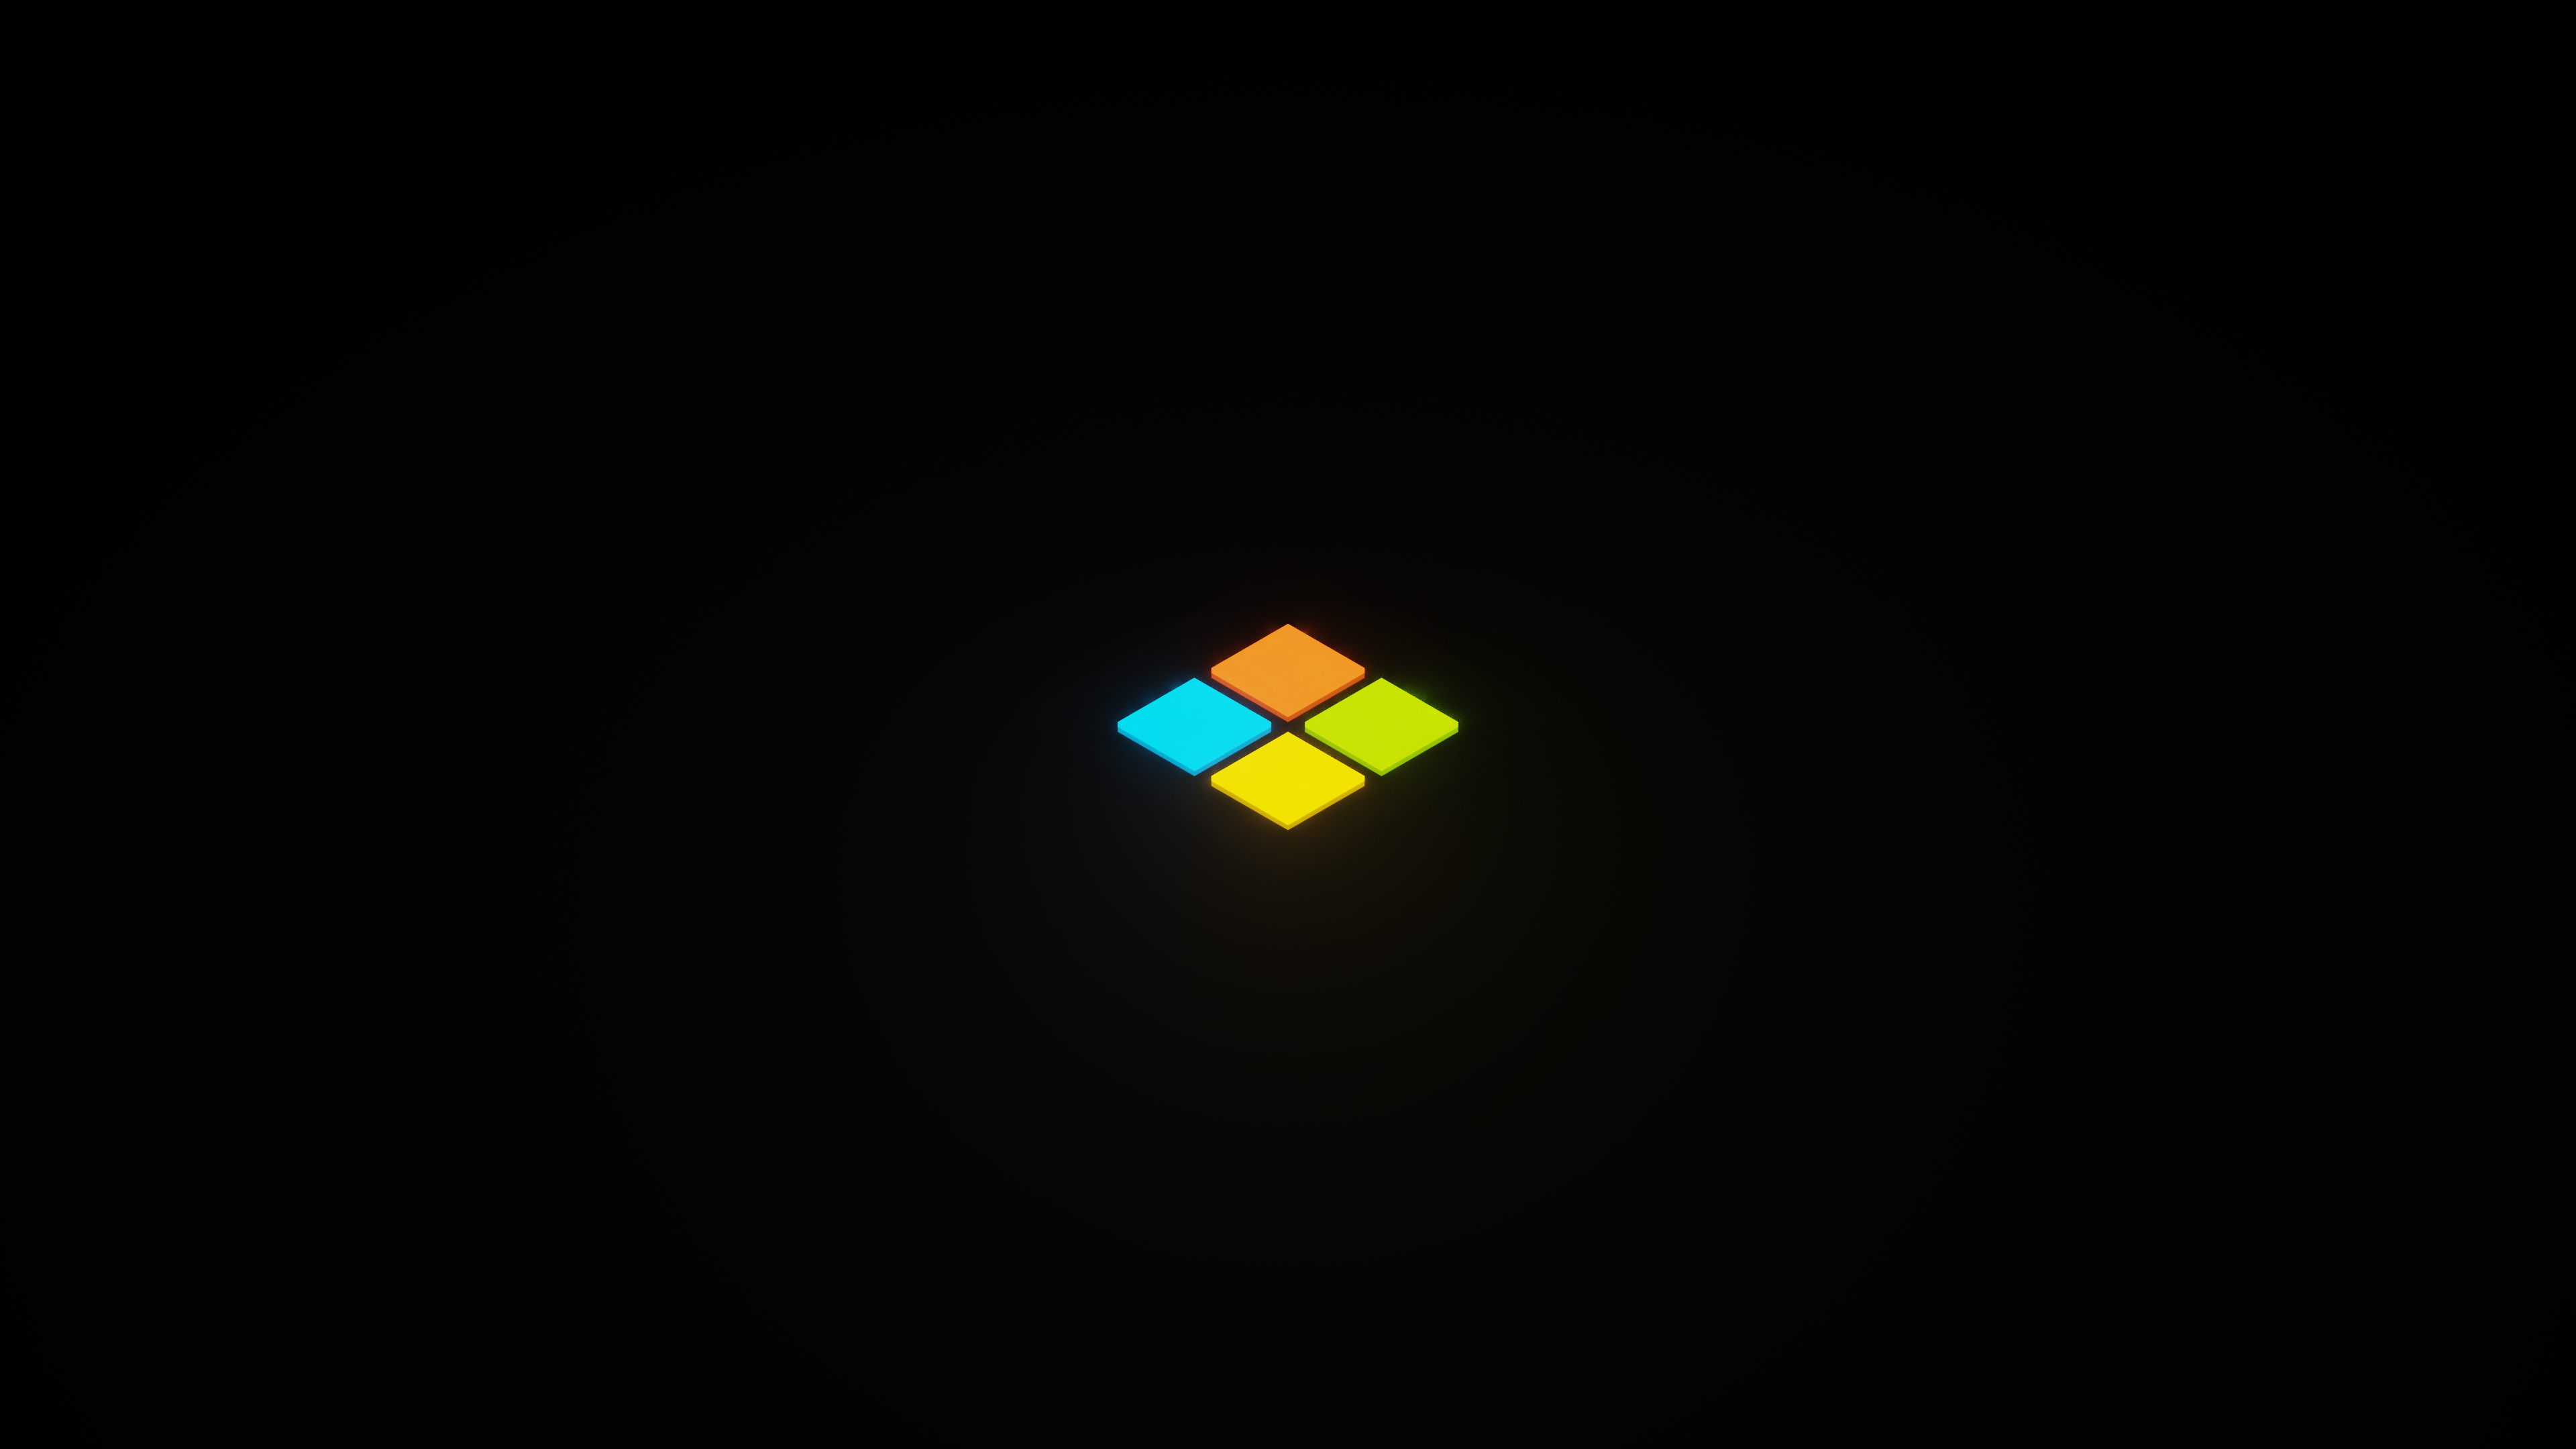 Made a 4k Windows logo wallpaper. I miss the old colors